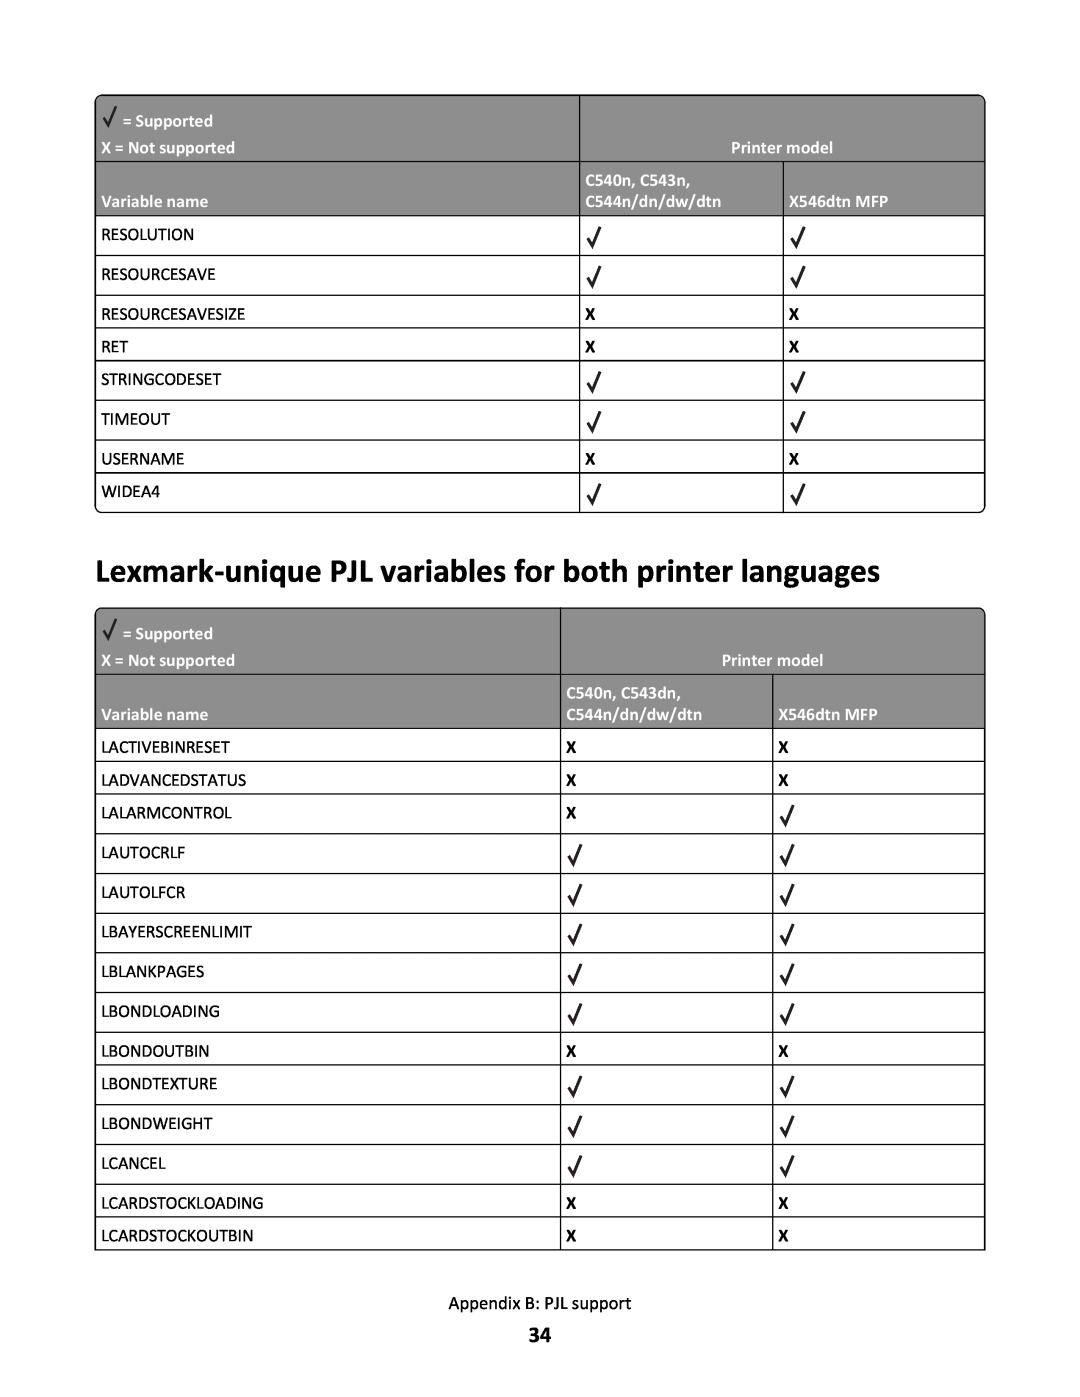 Lexmark C544N/DN/DW/DTN manual Lexmark-unique PJL variables for both printer languages, = Supported, X = Not supported 